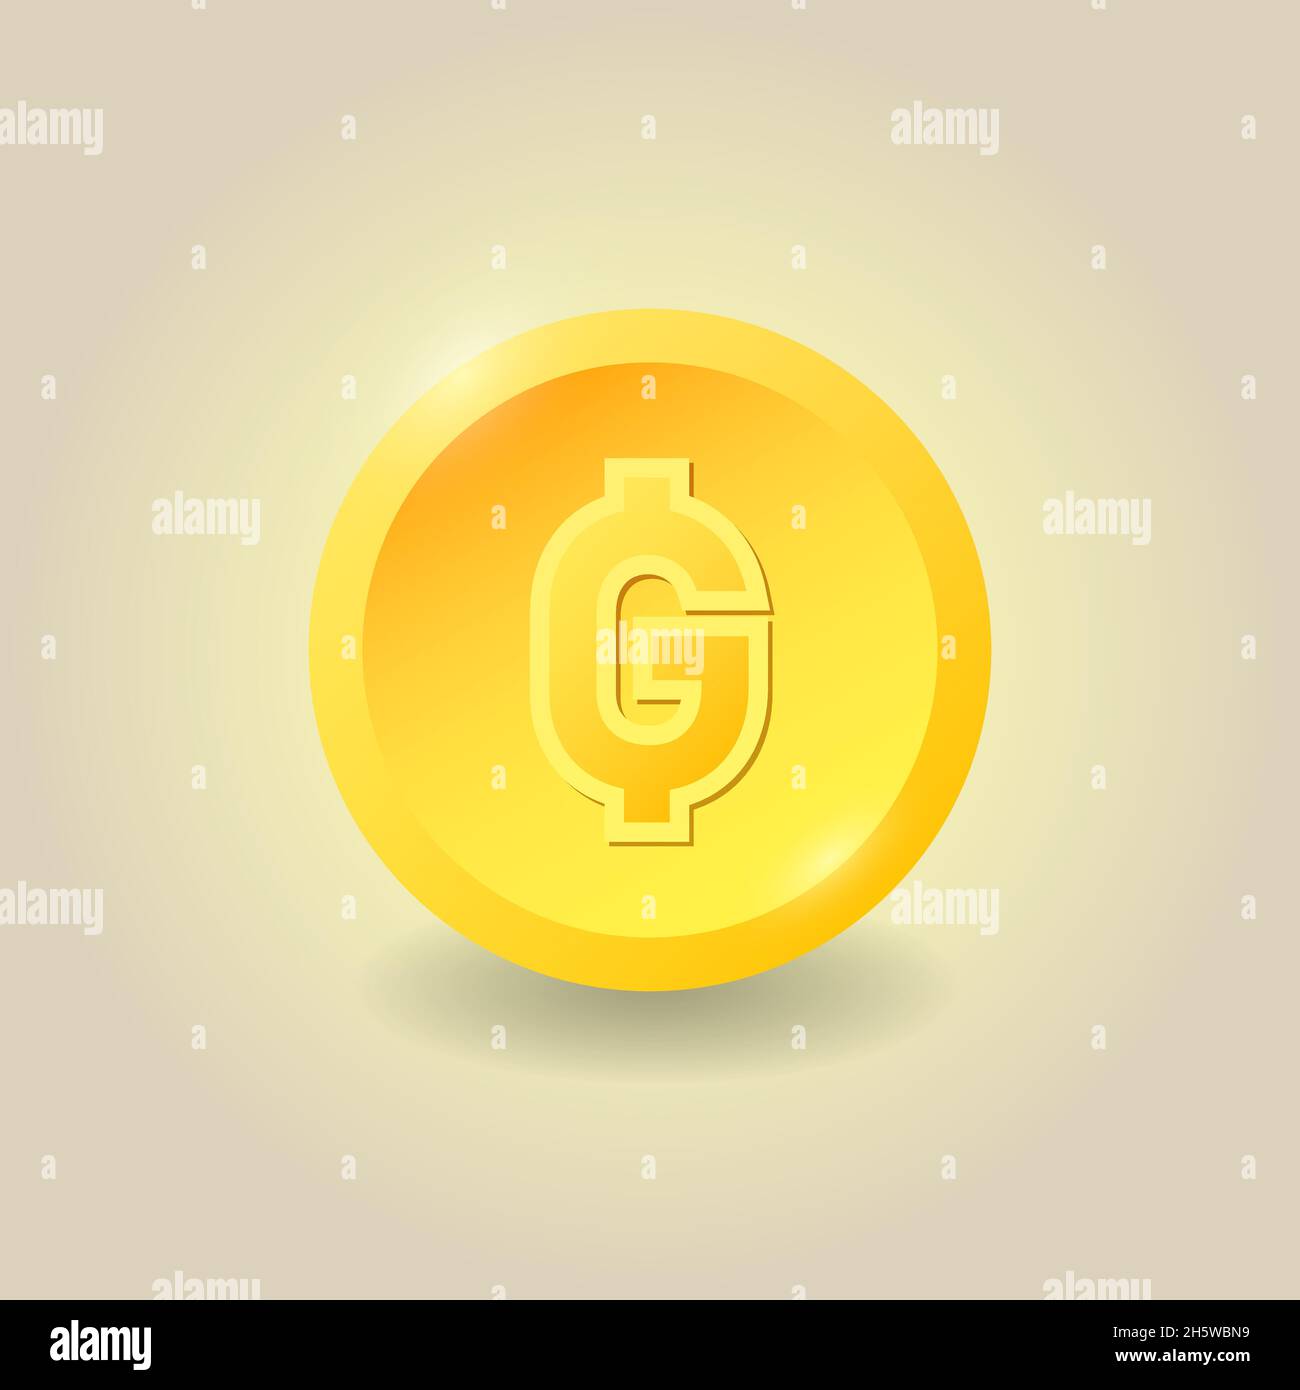 Gold paraguayan guaranies coin. Vector illustration for websites, web design, mobile app, infographics. Stock Vector